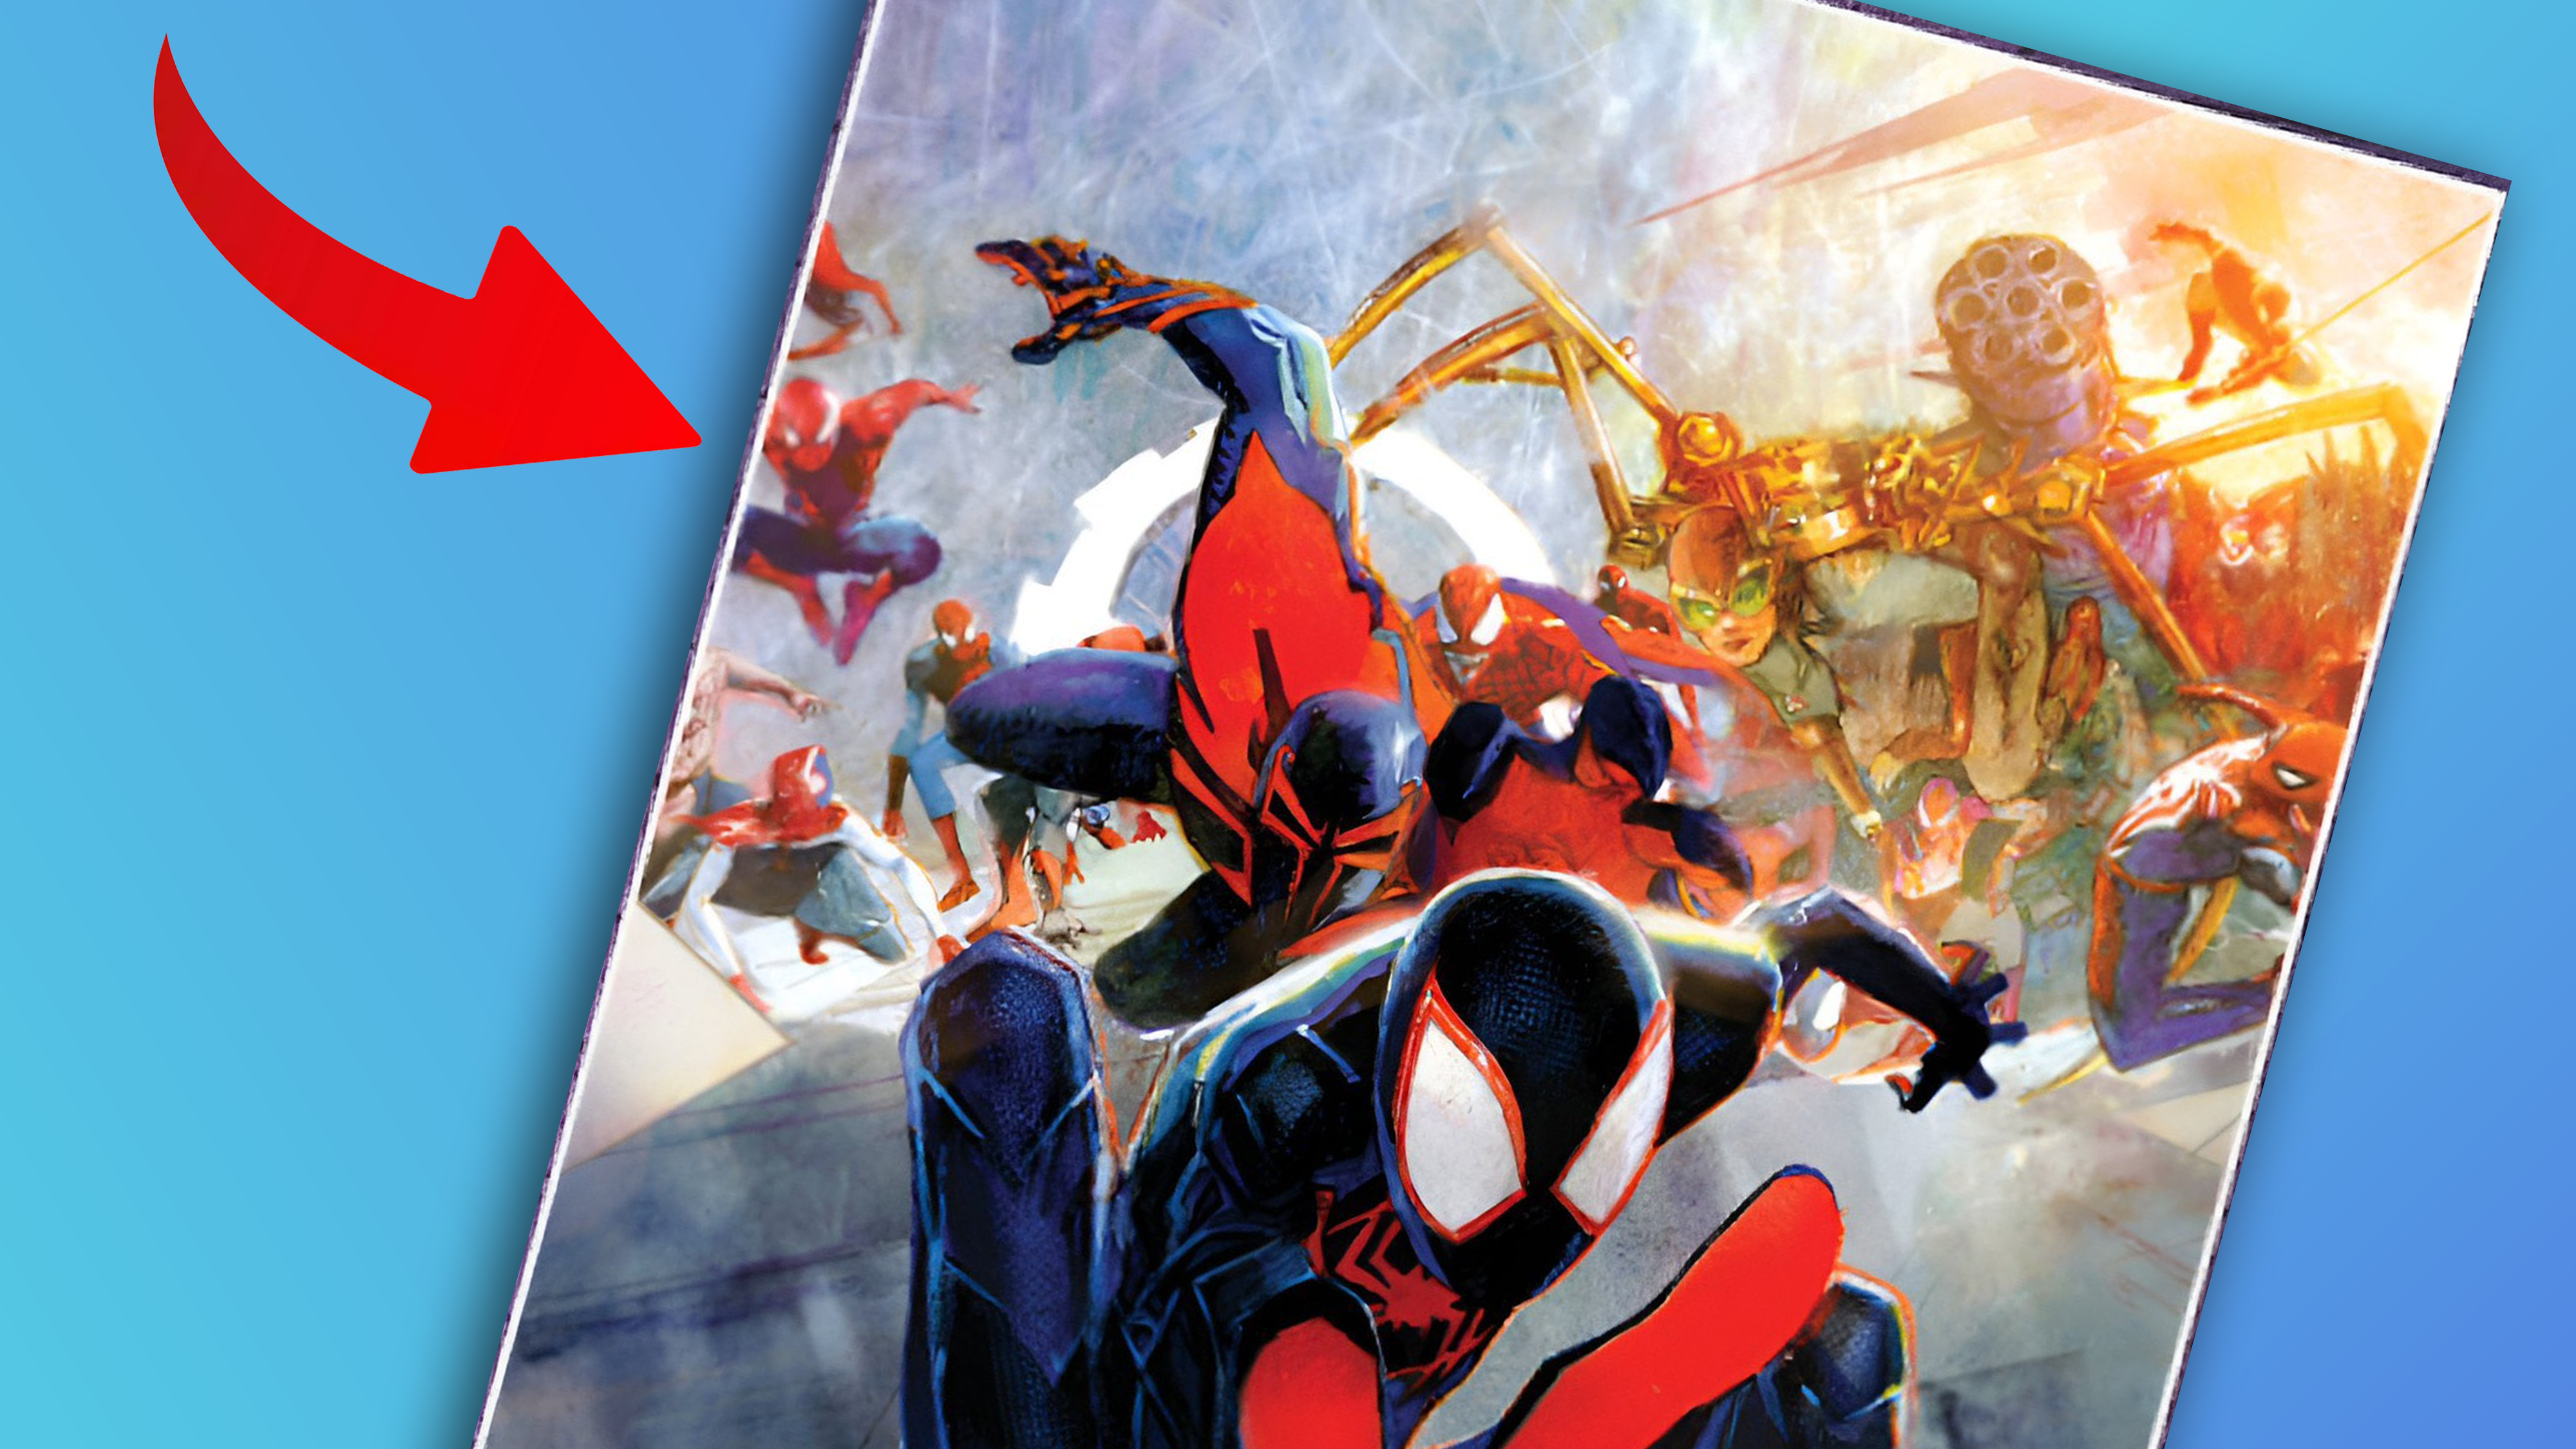 Spider-Man: Across the Spider-Verse': First Poster Arrives in this